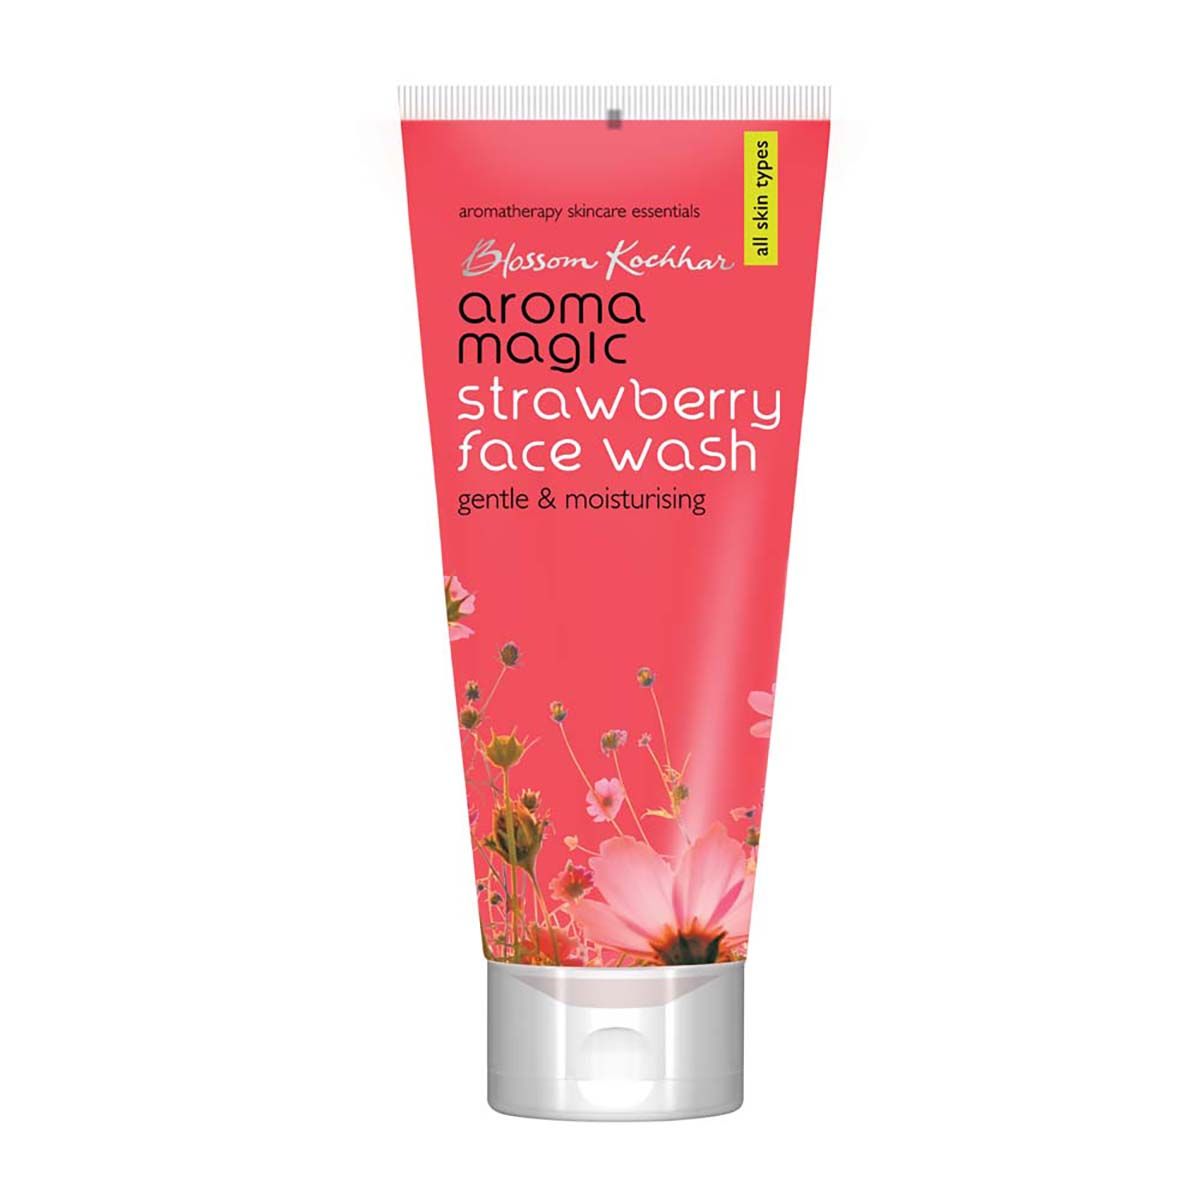 Aroma Magic Strawberry Face Wash Gentle & Moisturising For All Skin Types